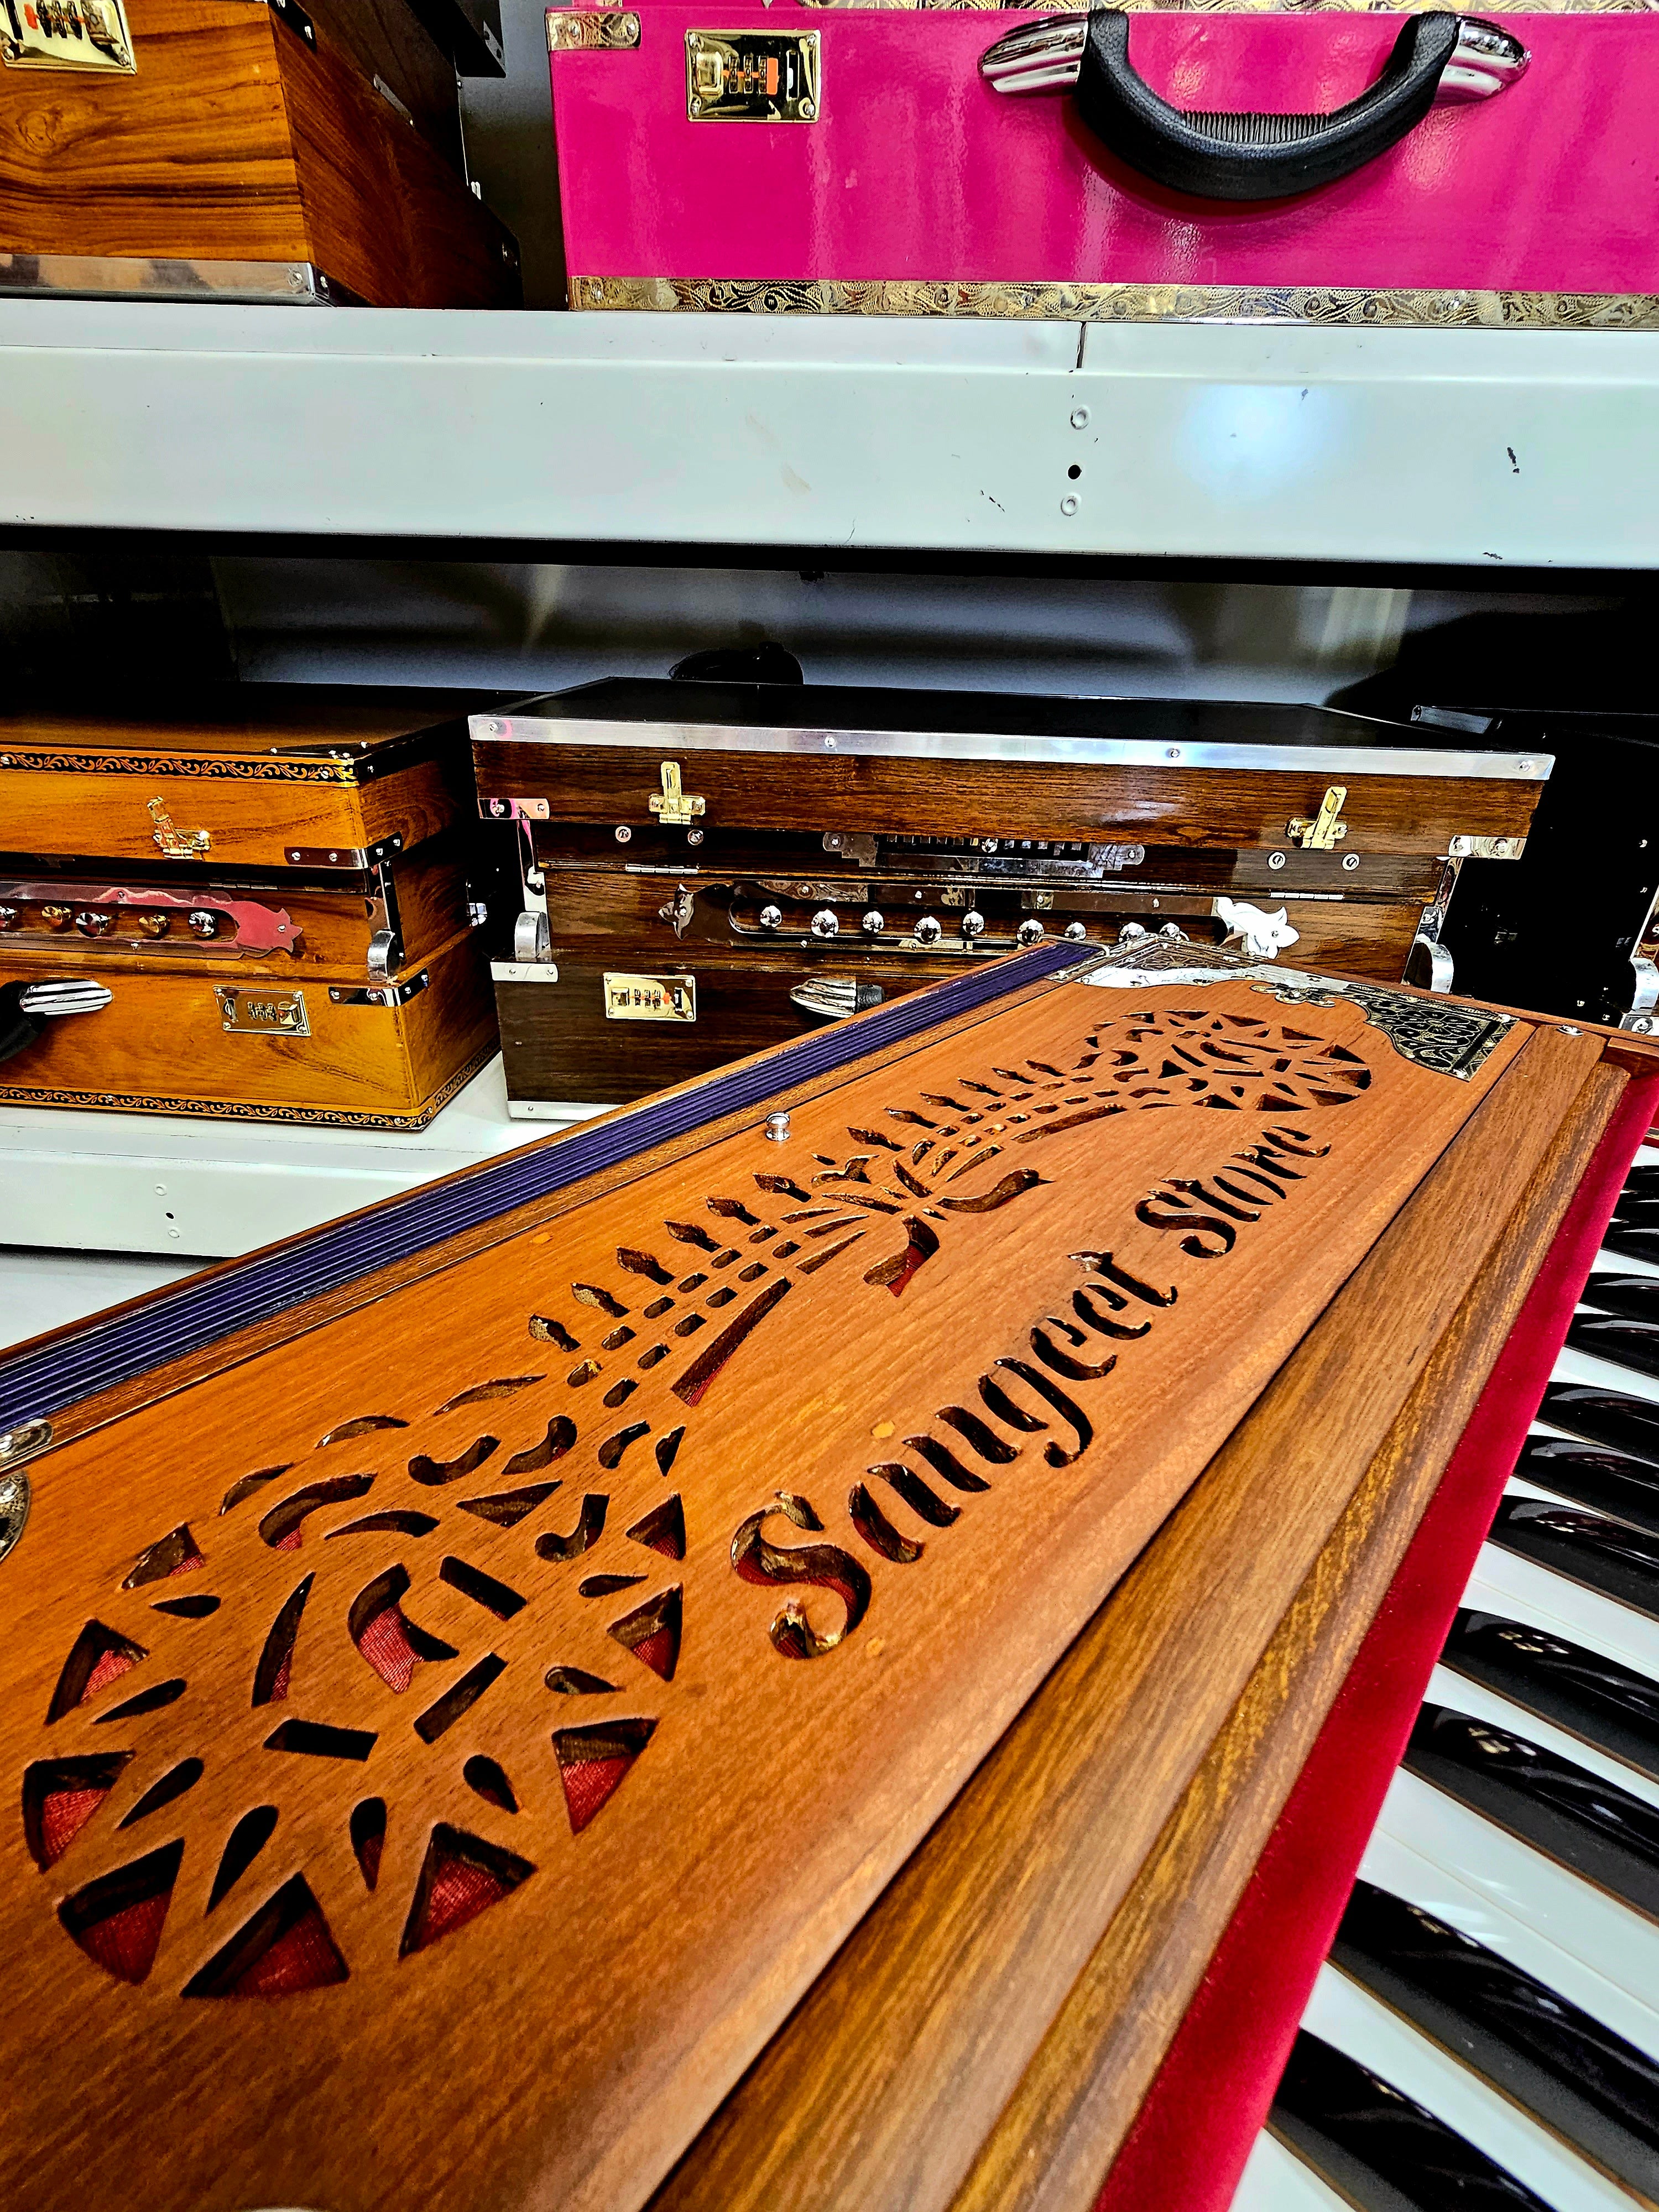 The Harmony Glide MMF 9-Scale Changer - A Natural Wood Matte Finish Harmonium with Silver Accents, Unique Stoppers Layout, and Light/Agile Keys!